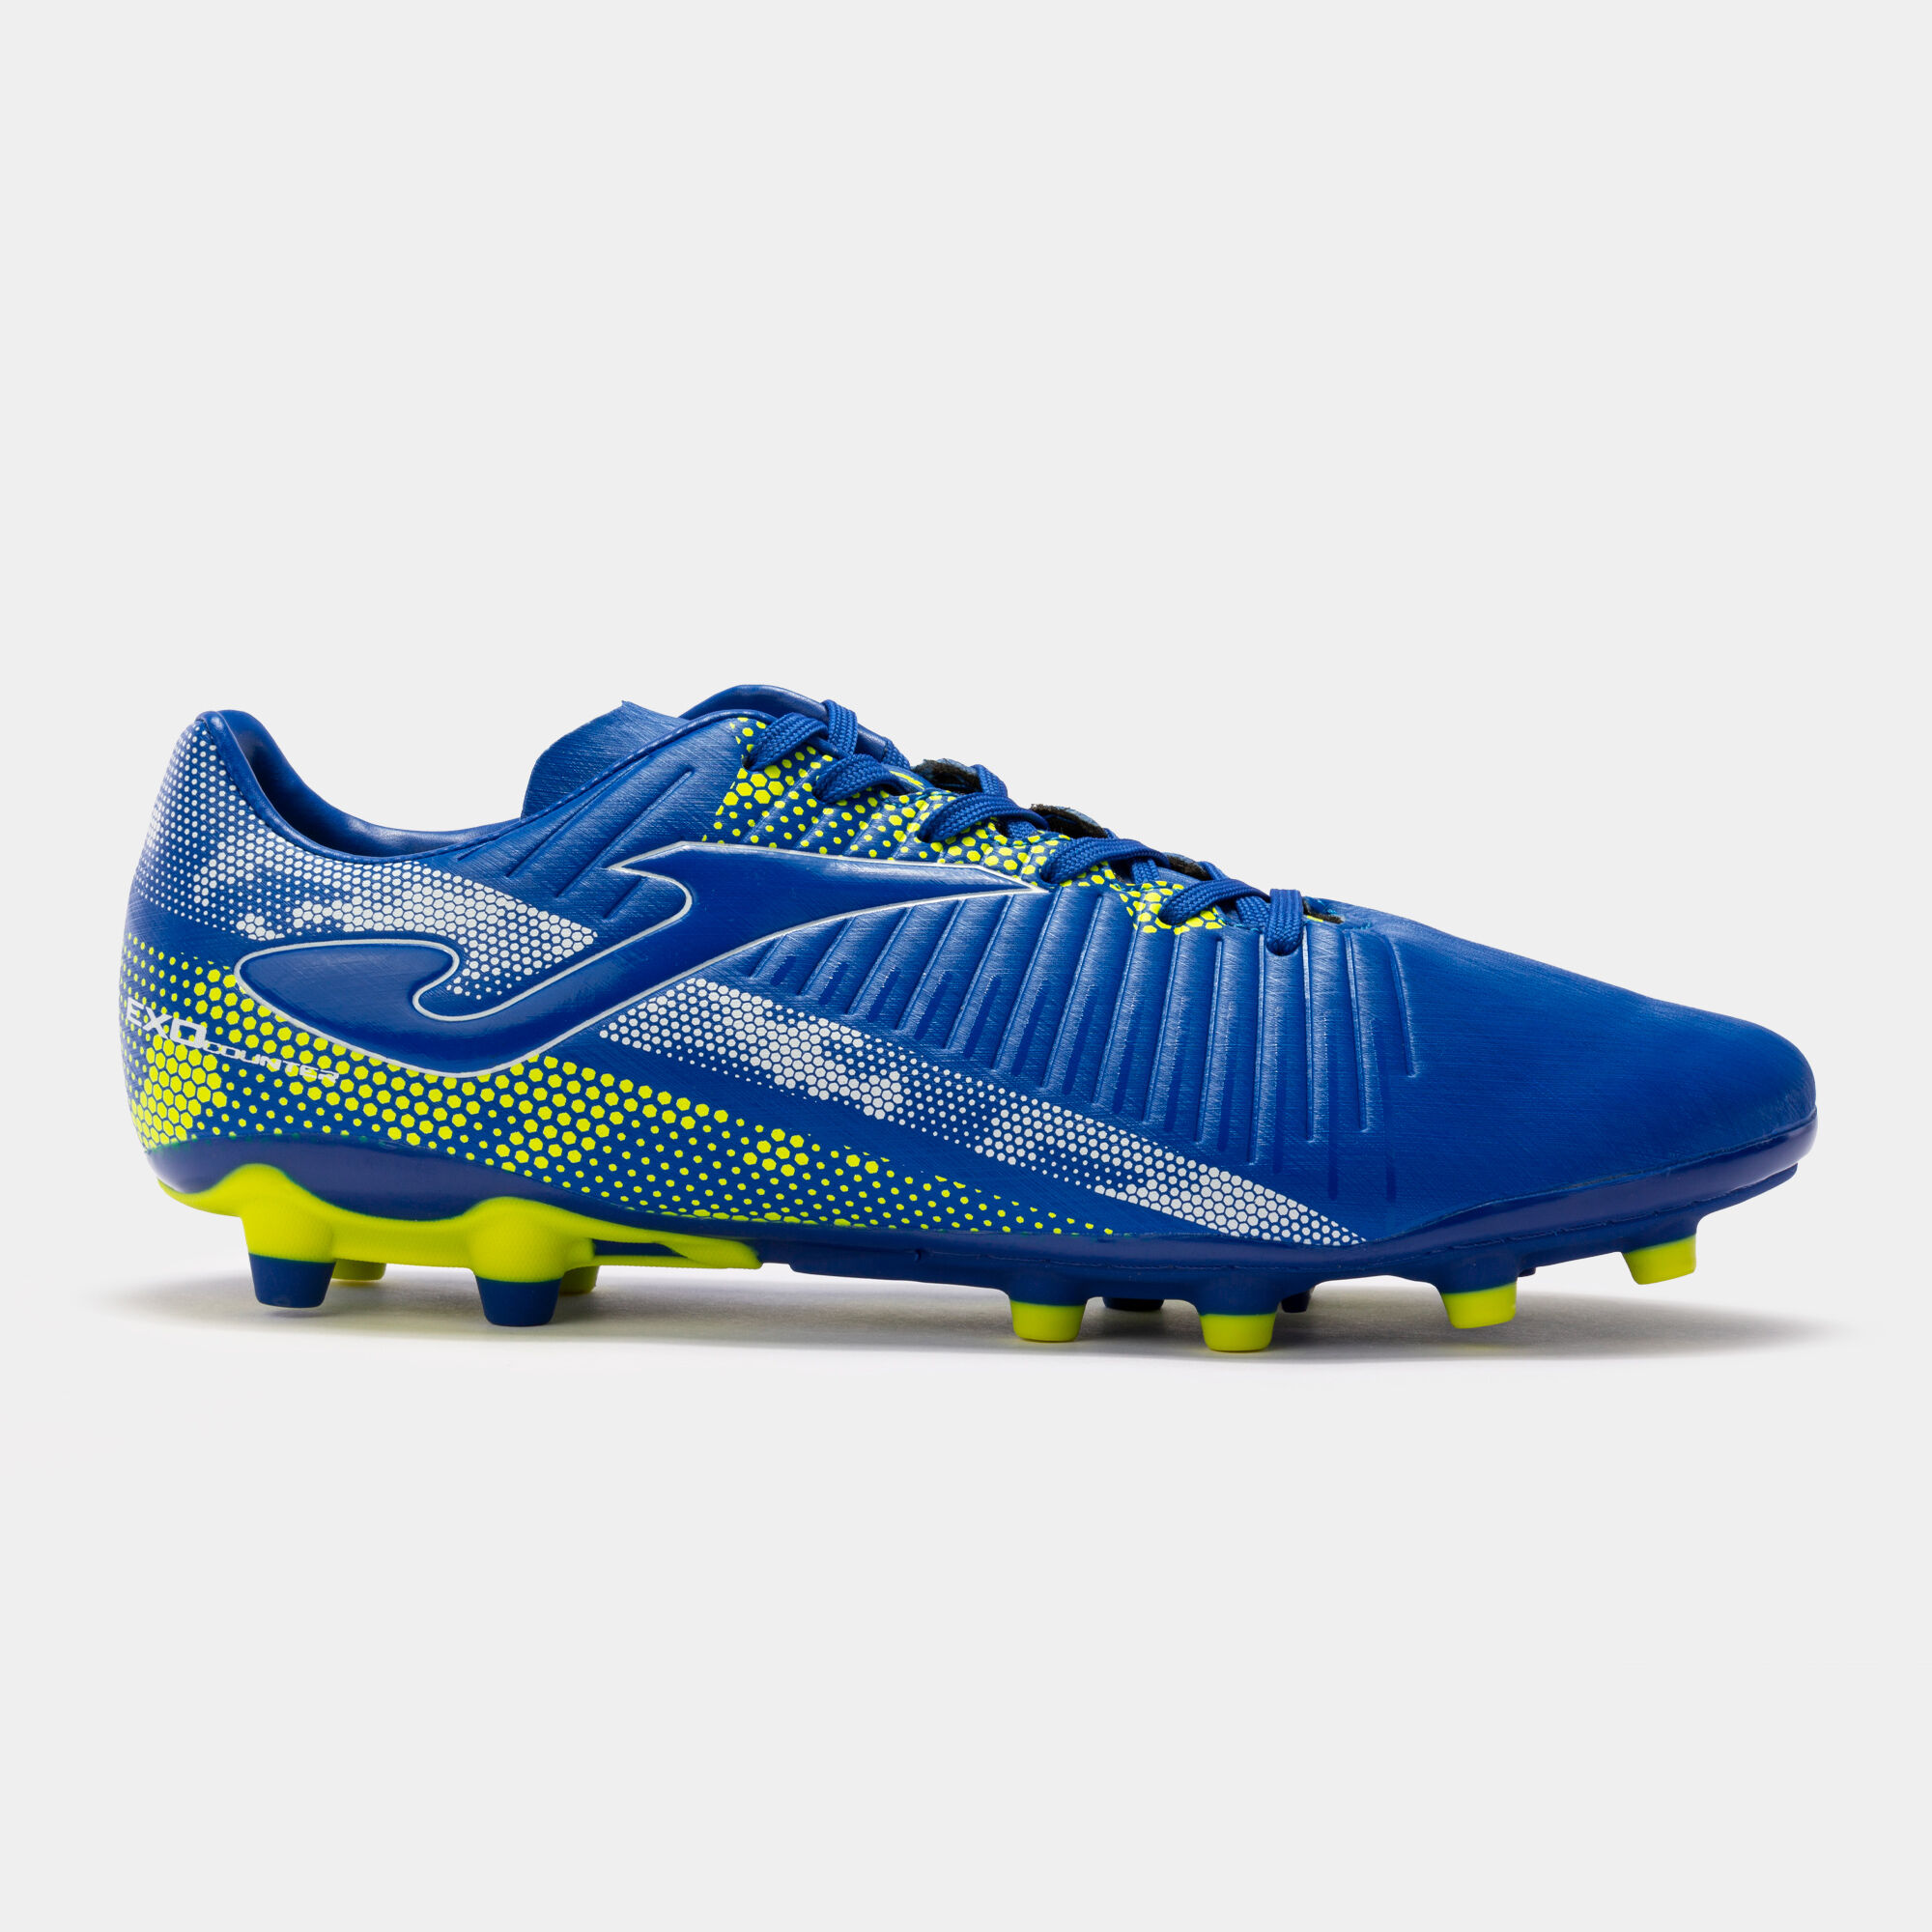 FOOTBALL BOOTS PROPULSION 21 FIRM GROUND FG ROYAL BLUE FLUORESCENT YELLOW